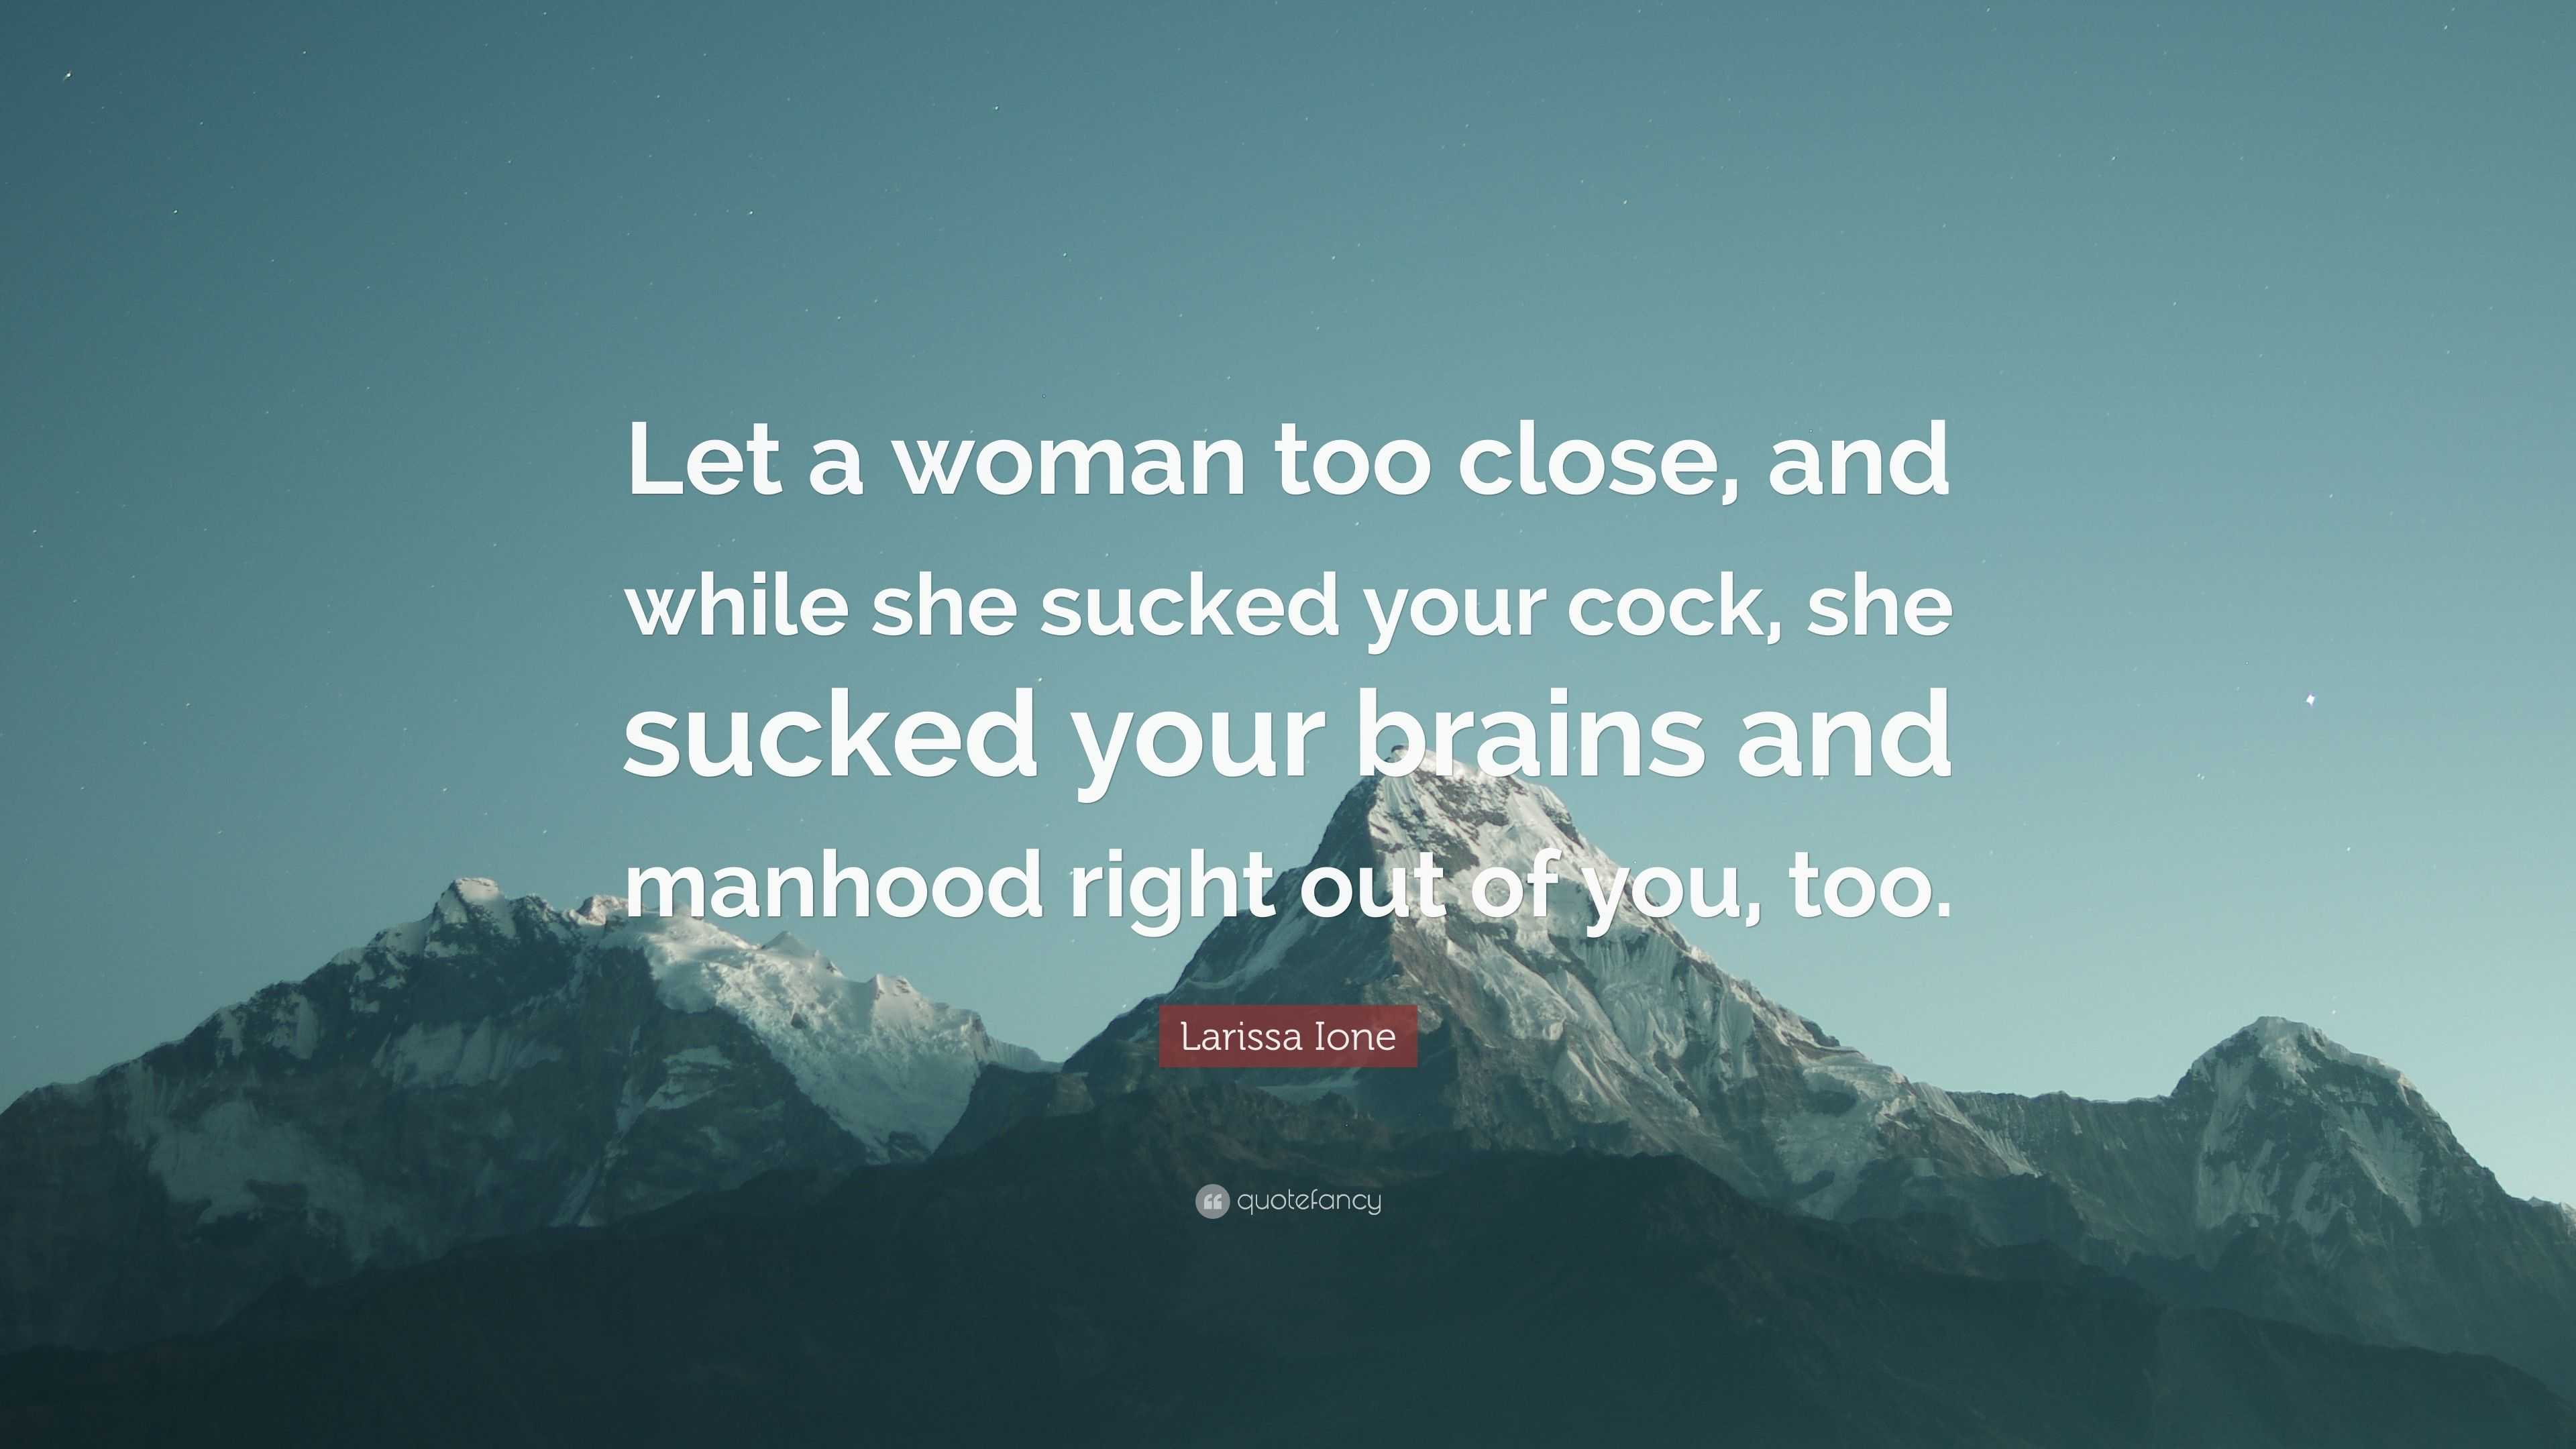 Larissa Ione Quote “Let a woman too